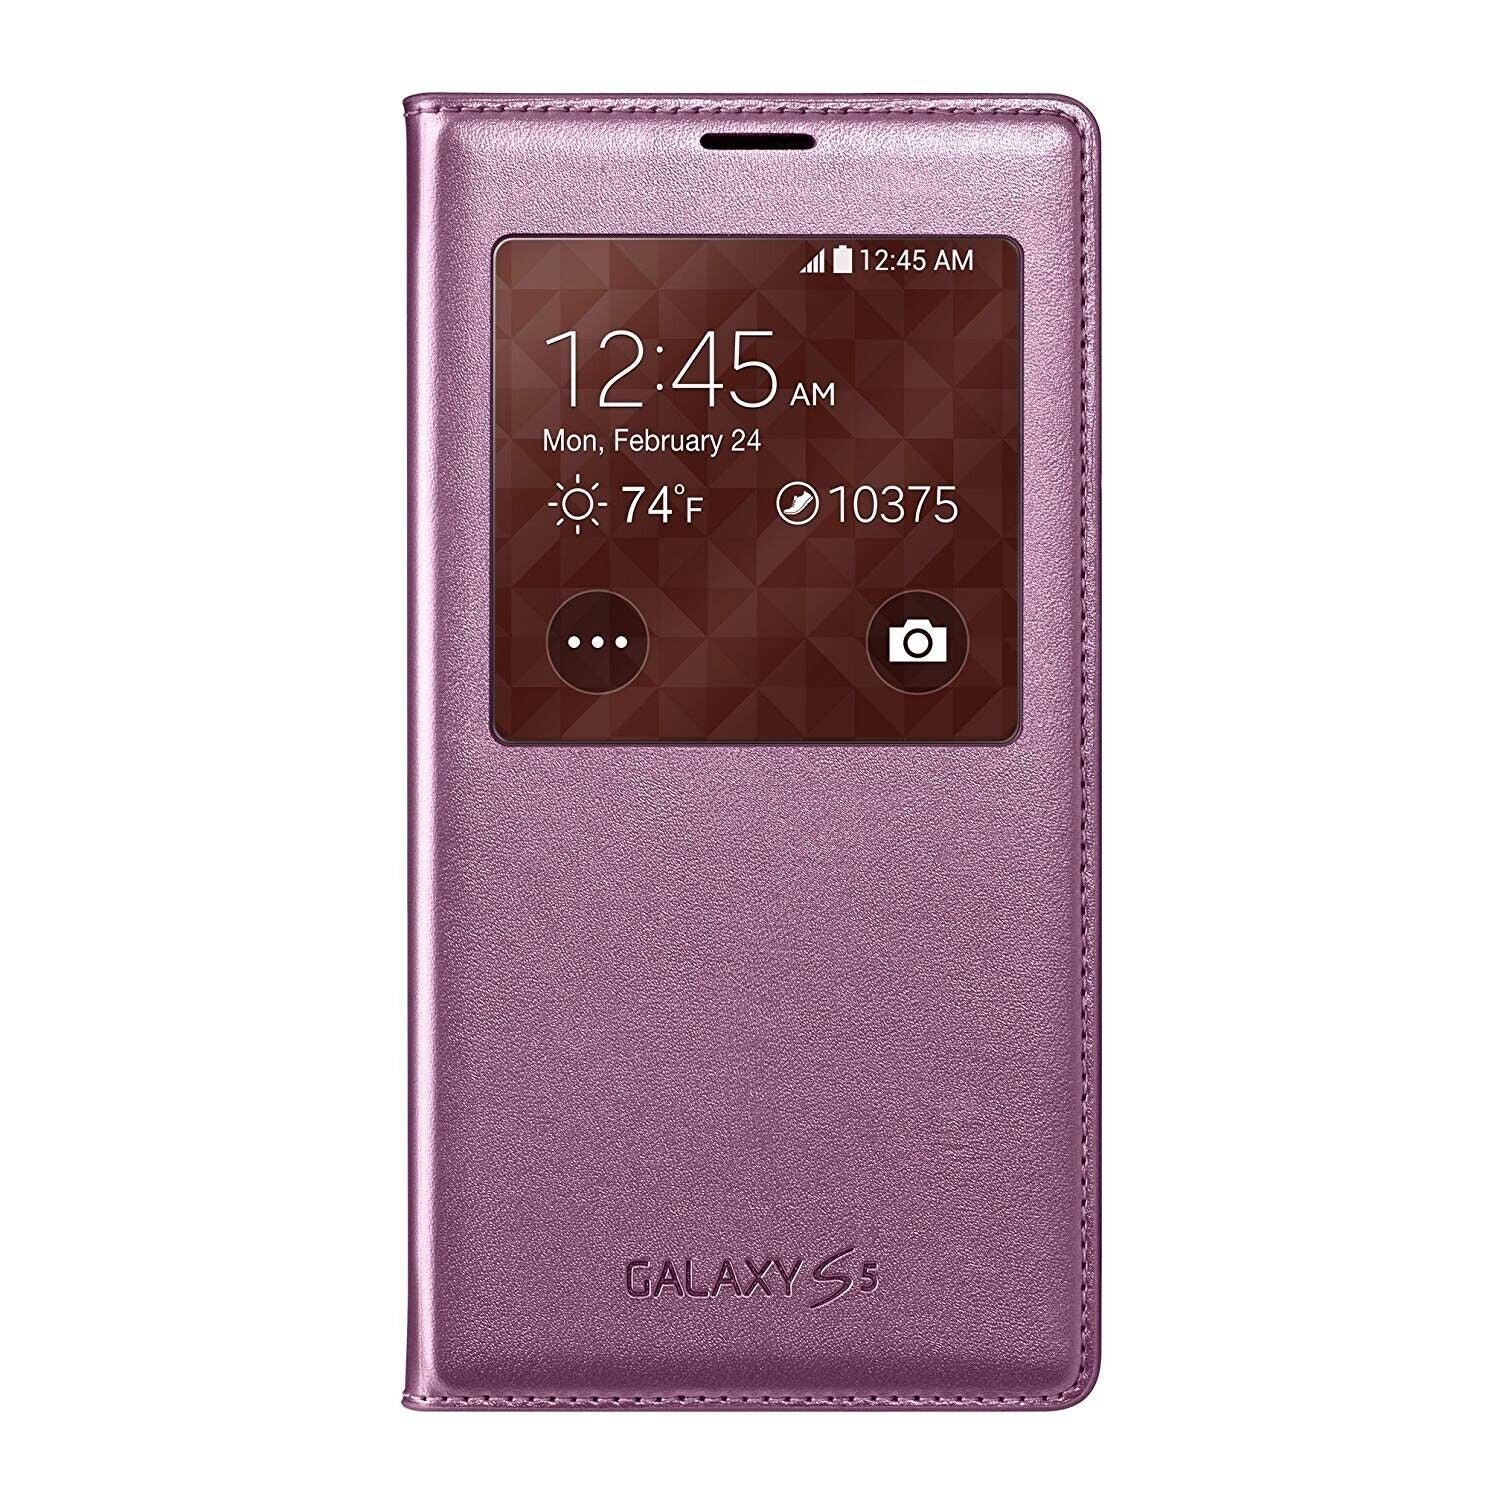 Samsung S-View Flip Cover for Samsung Galaxy S5 - Pink